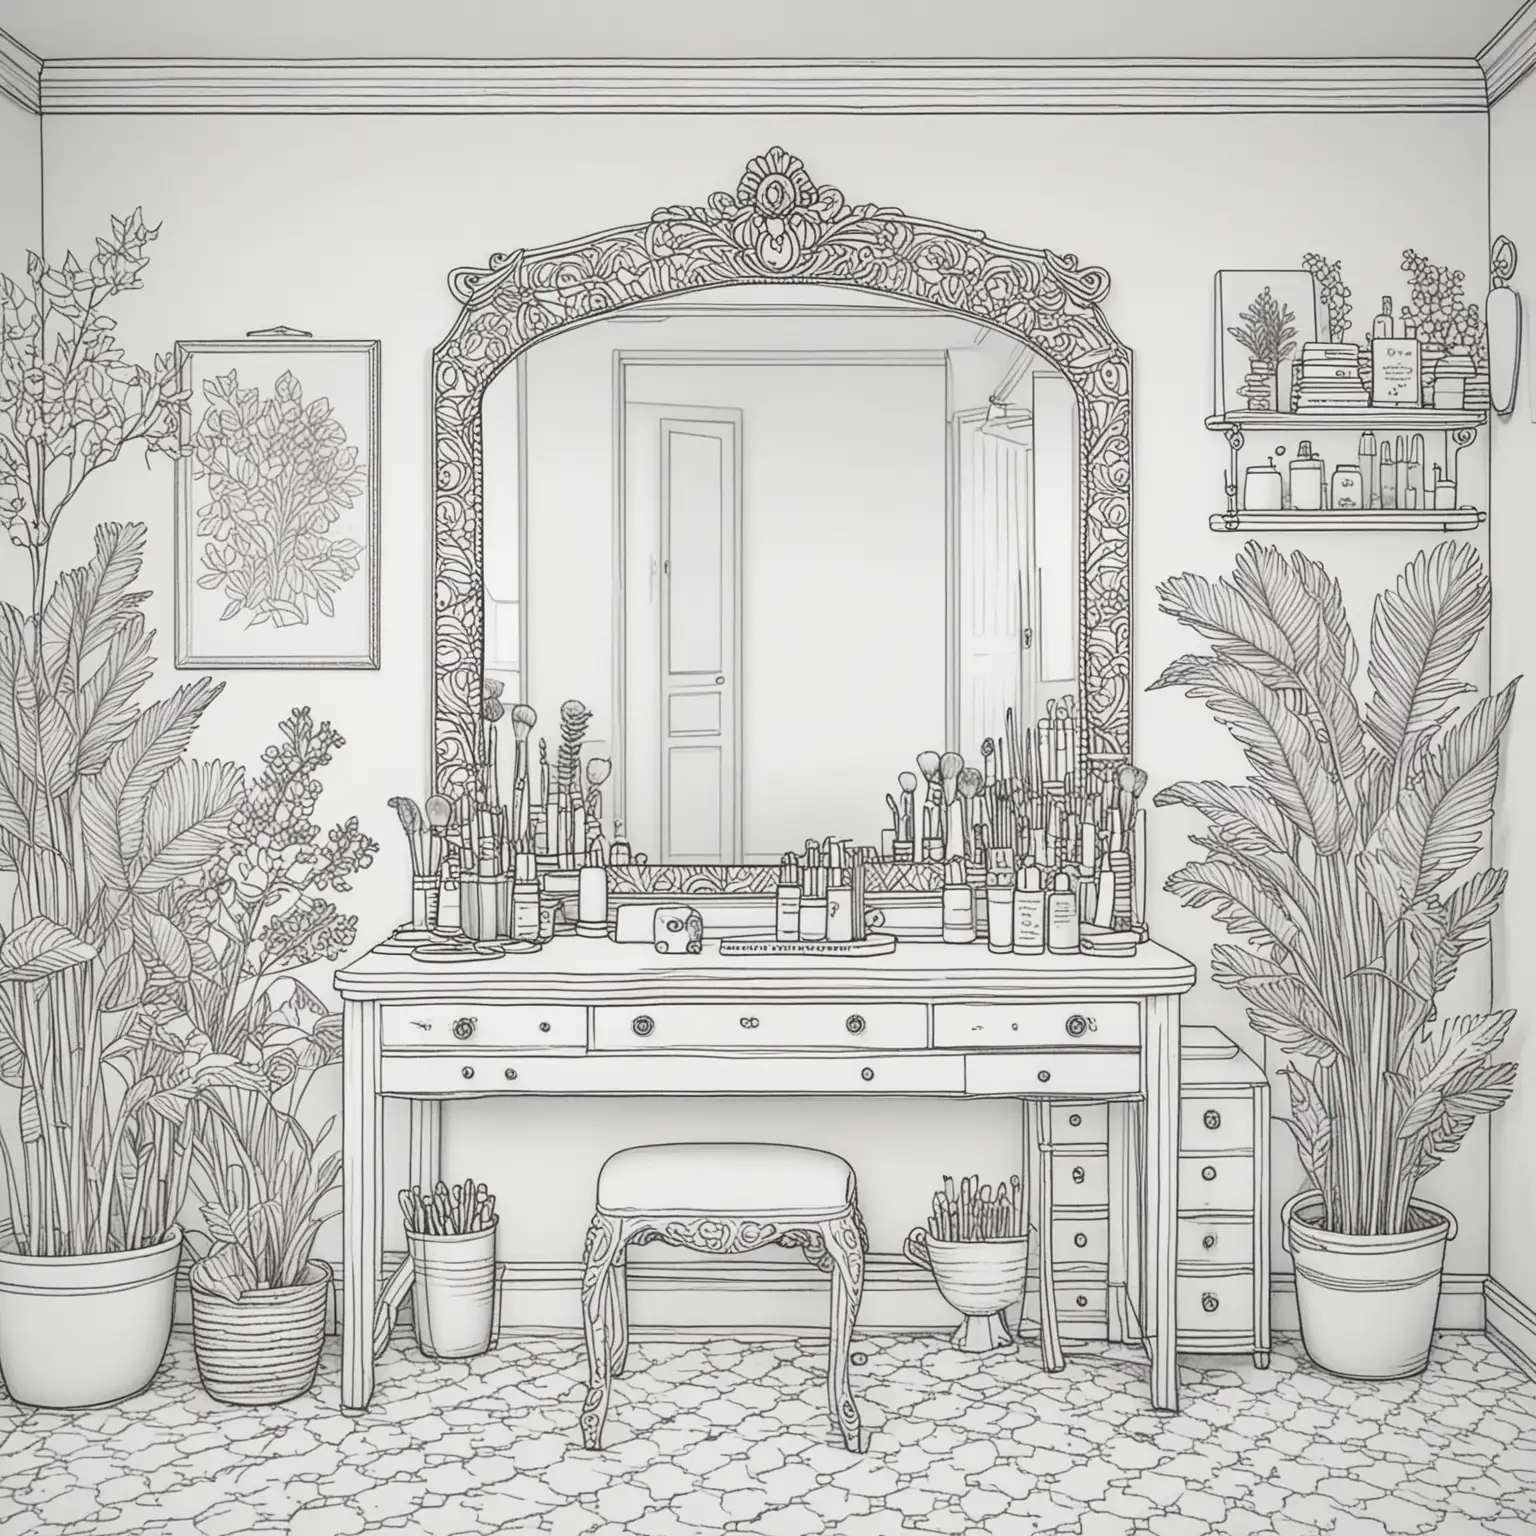 Elegant Beauty Room Coloring Page for Adults on Clean White Background